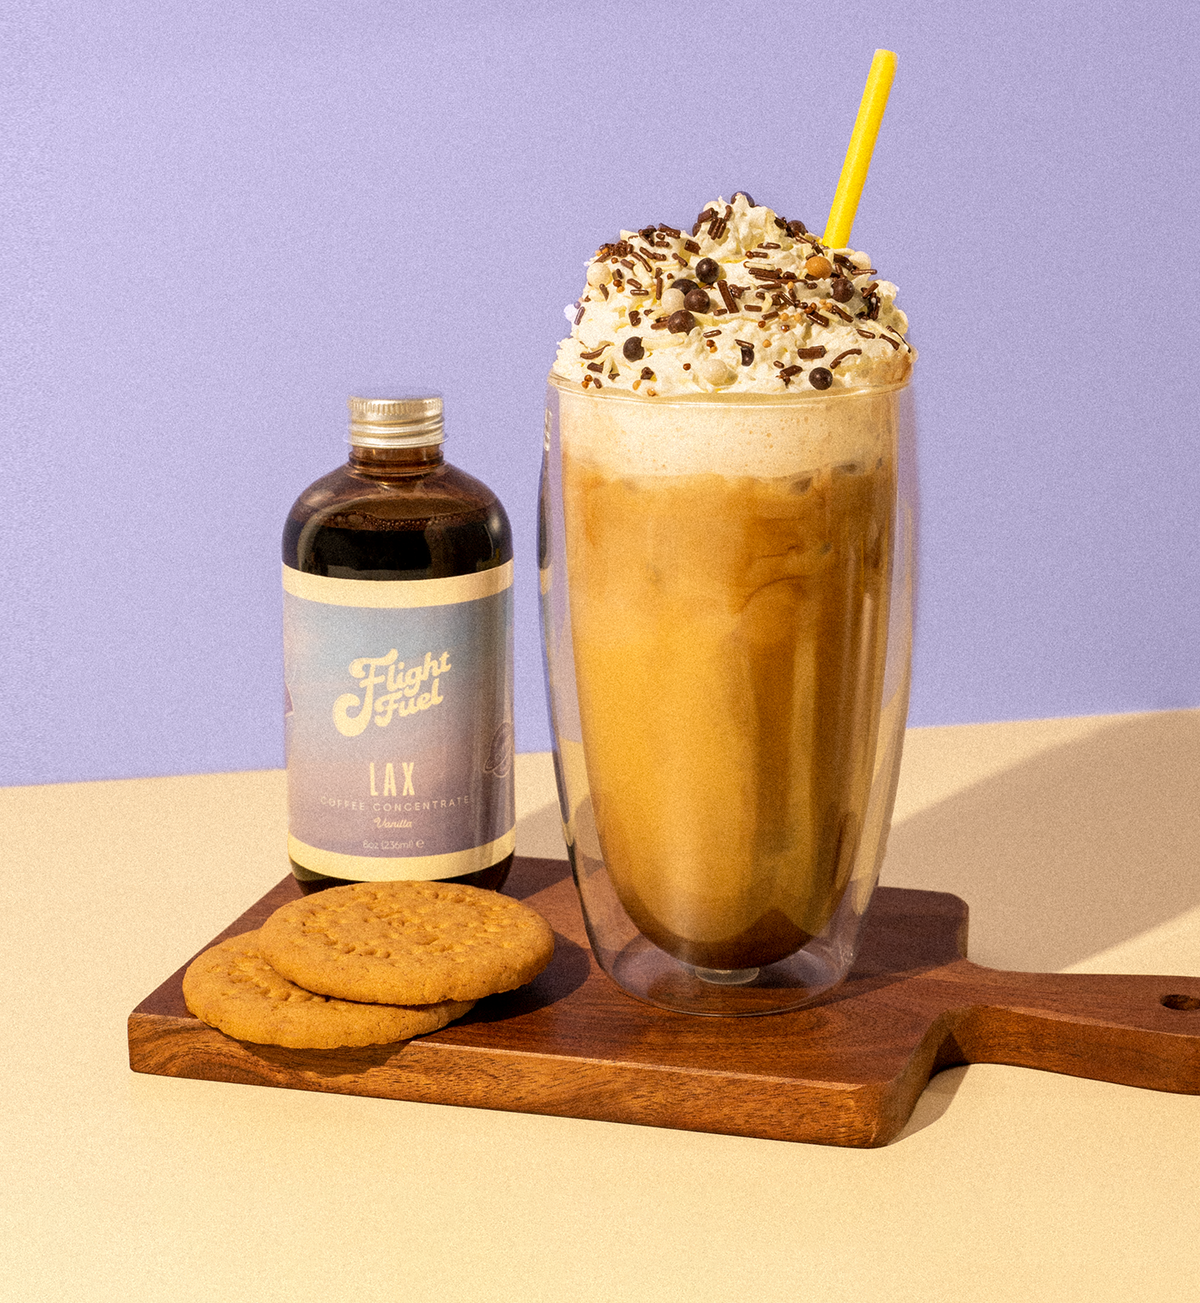 Vanilla Flavor Coffee Concentrate 8oz Bottle with a Vanilla iced coffee and some biscuits.